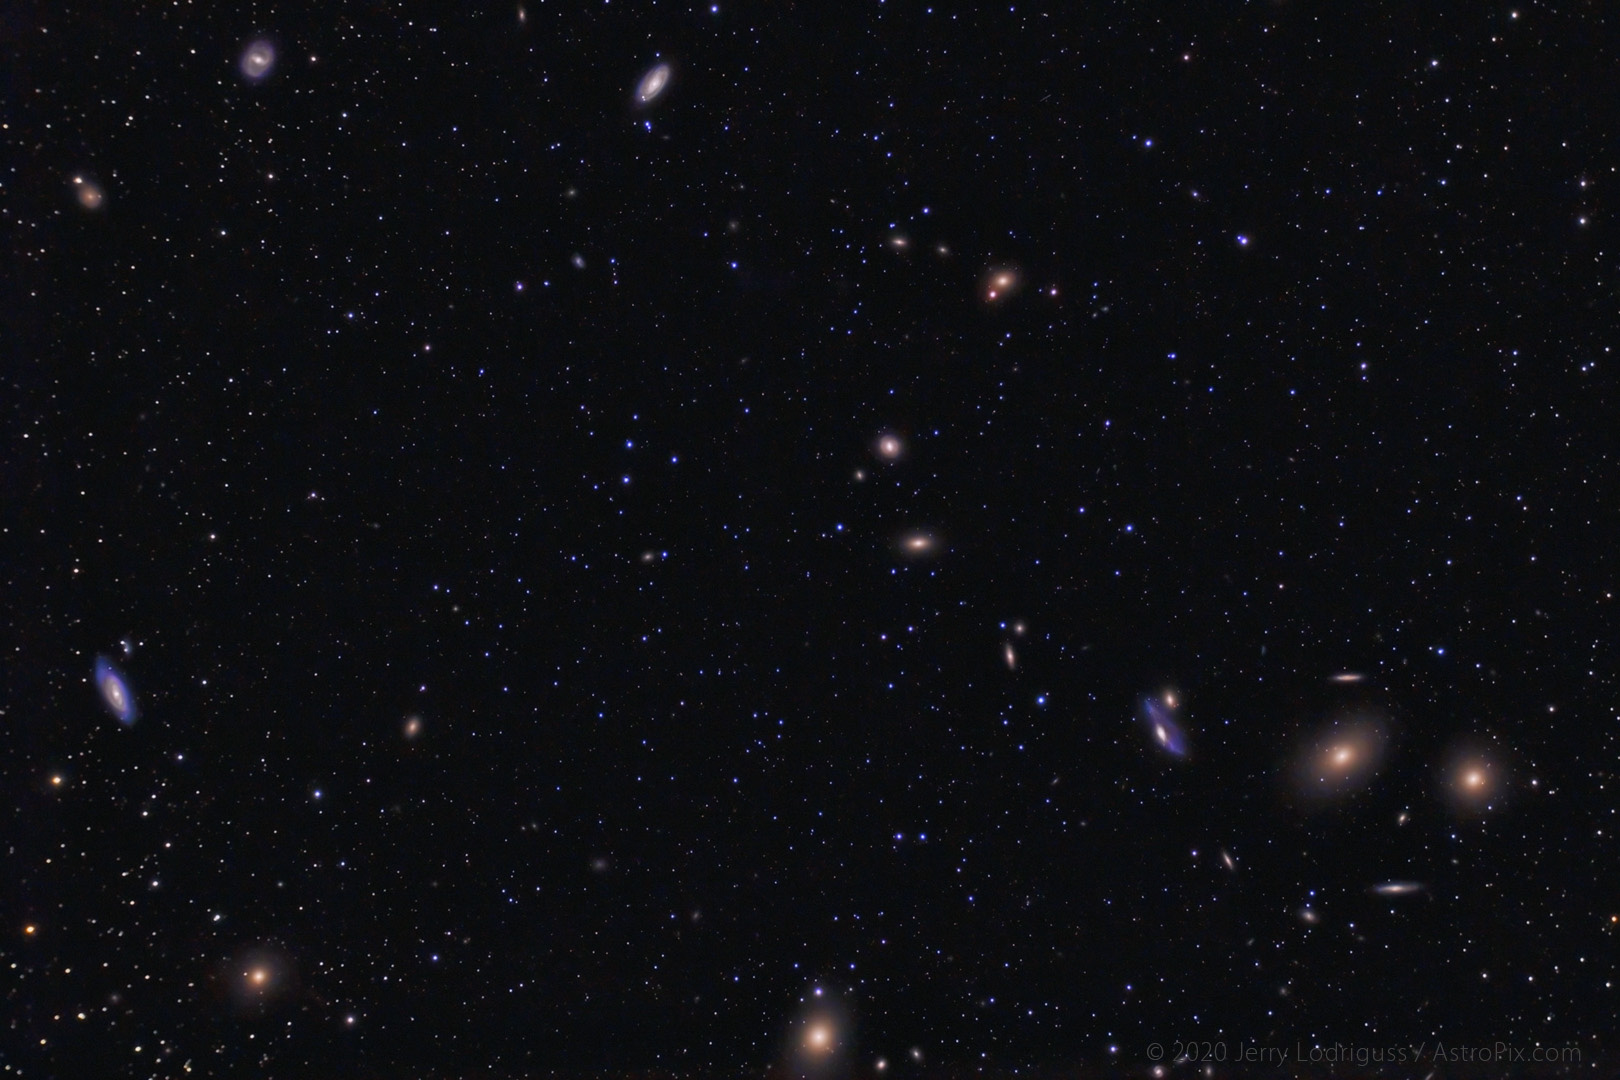 The Virgo Cluster of Galaxies with Markarian's Chain starting at lower right.